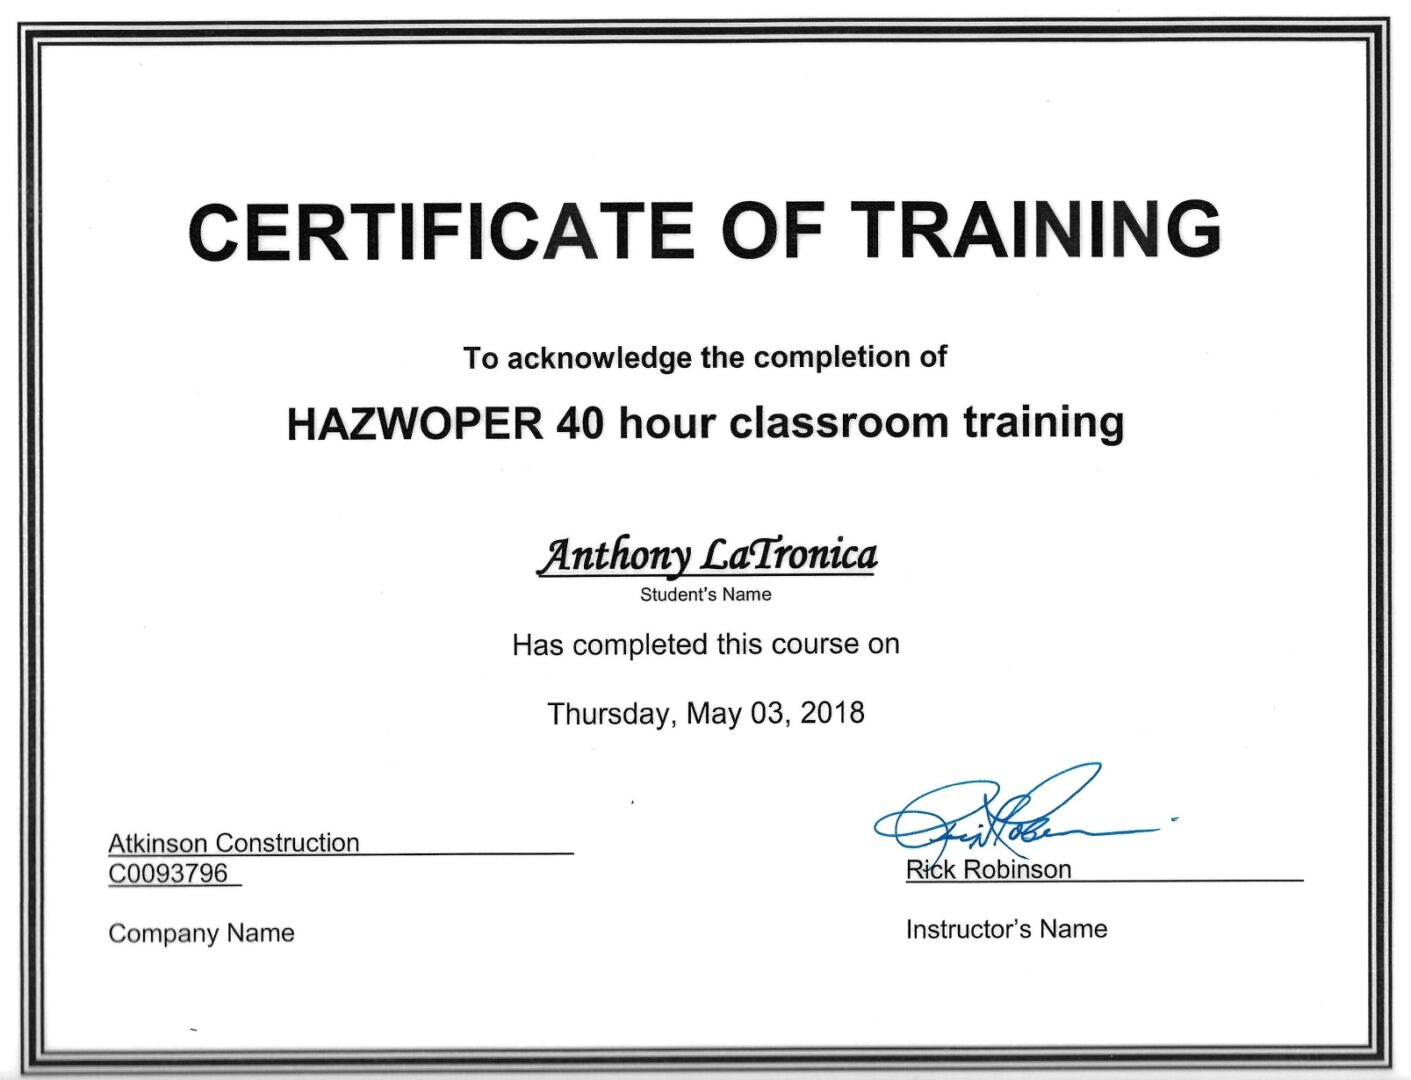 A certificate of training for hazwoper 4 0 hour classroom training.